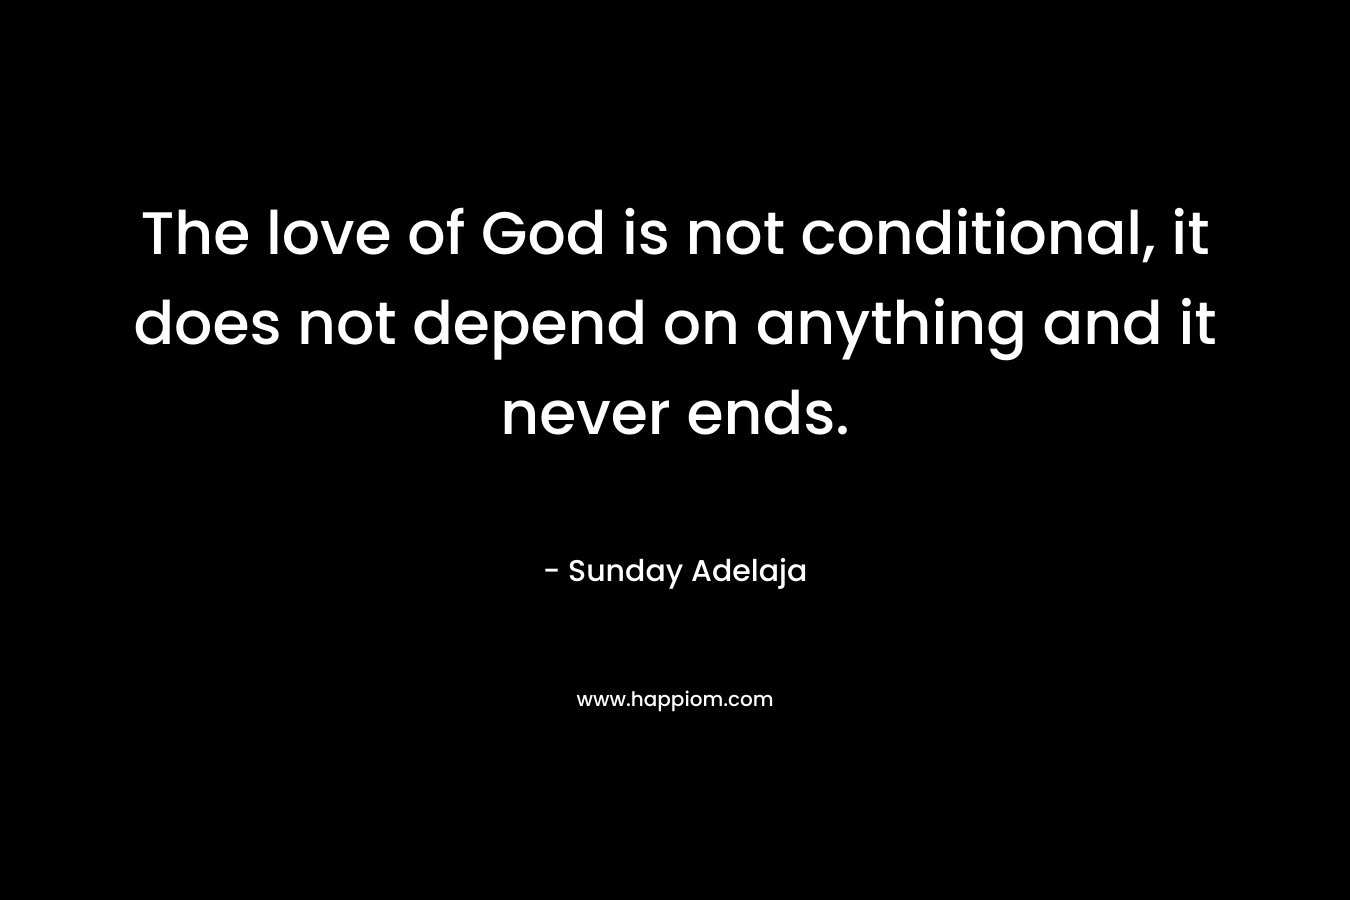 The love of God is not conditional, it does not depend on anything and it never ends.